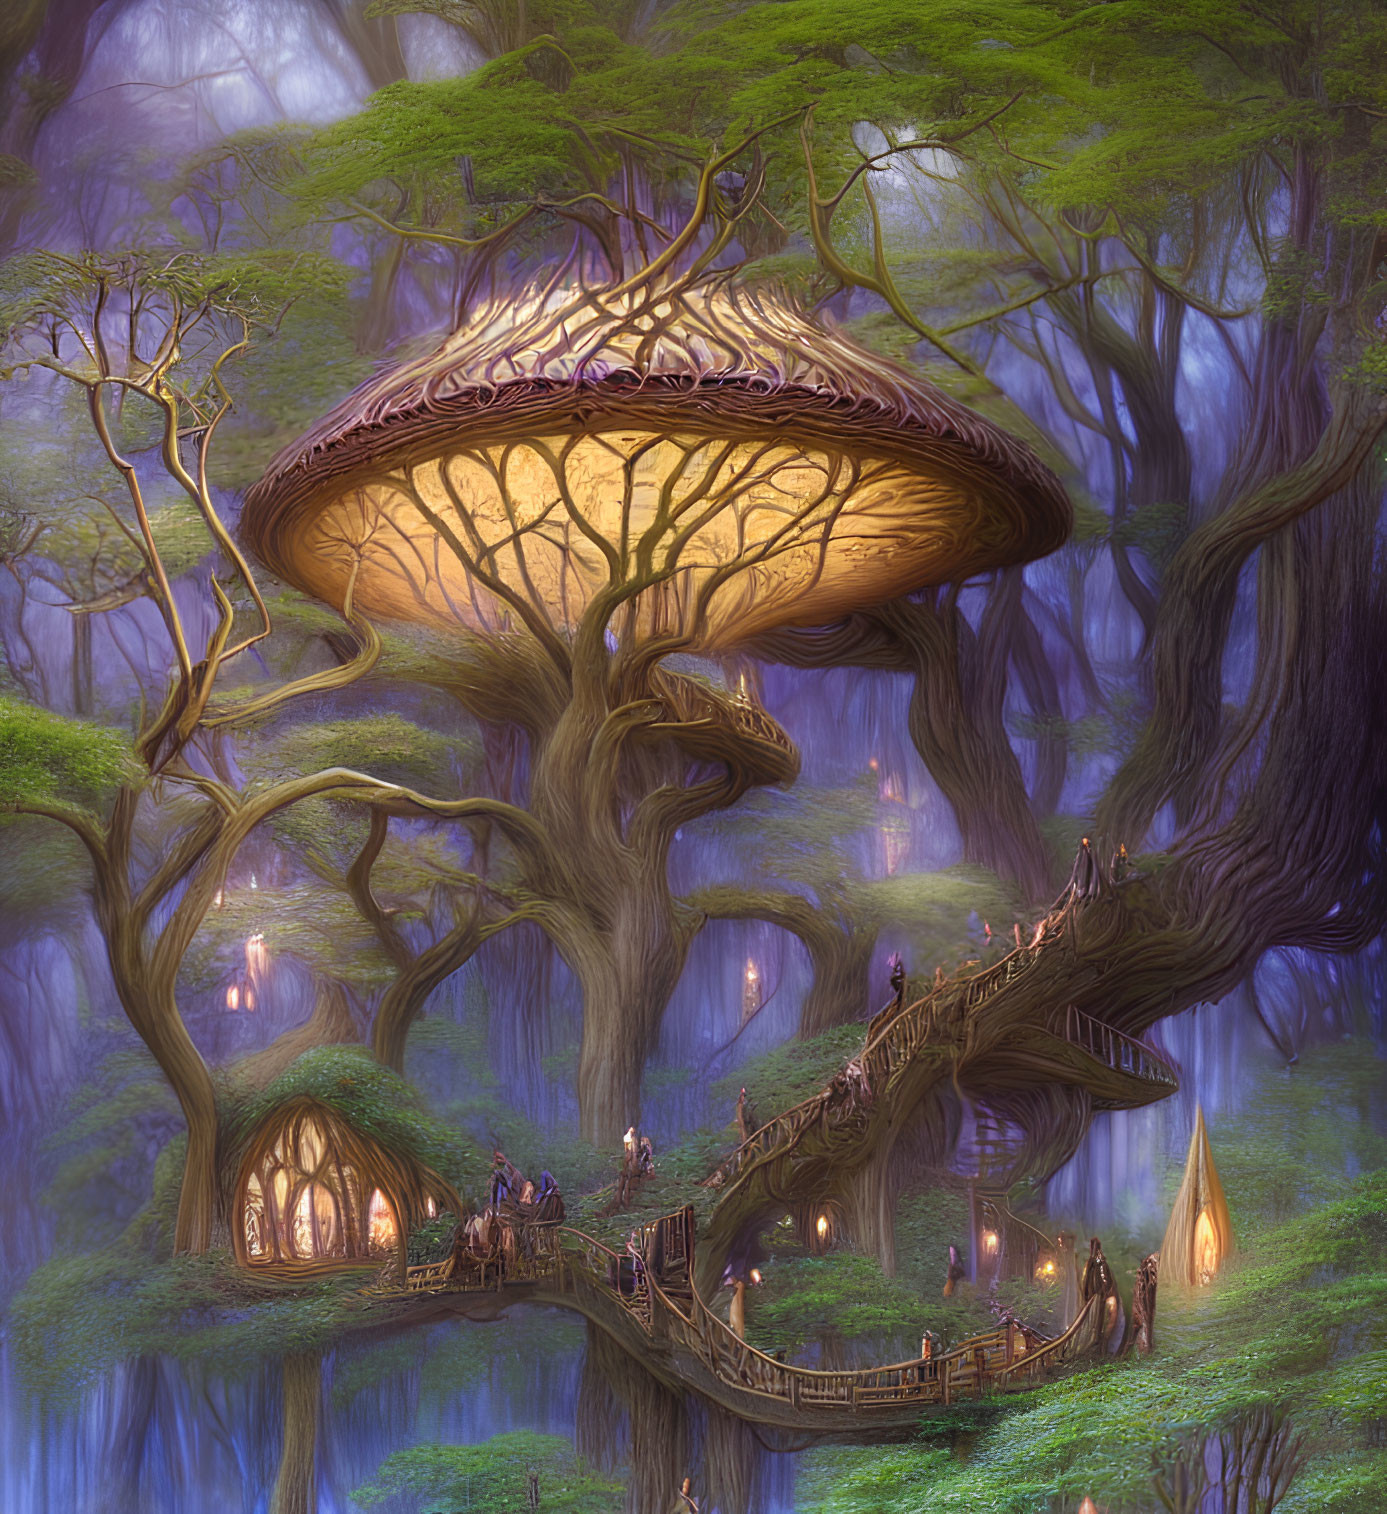 Enchanting forest scene with giant mushroom house and figures among ancient trees